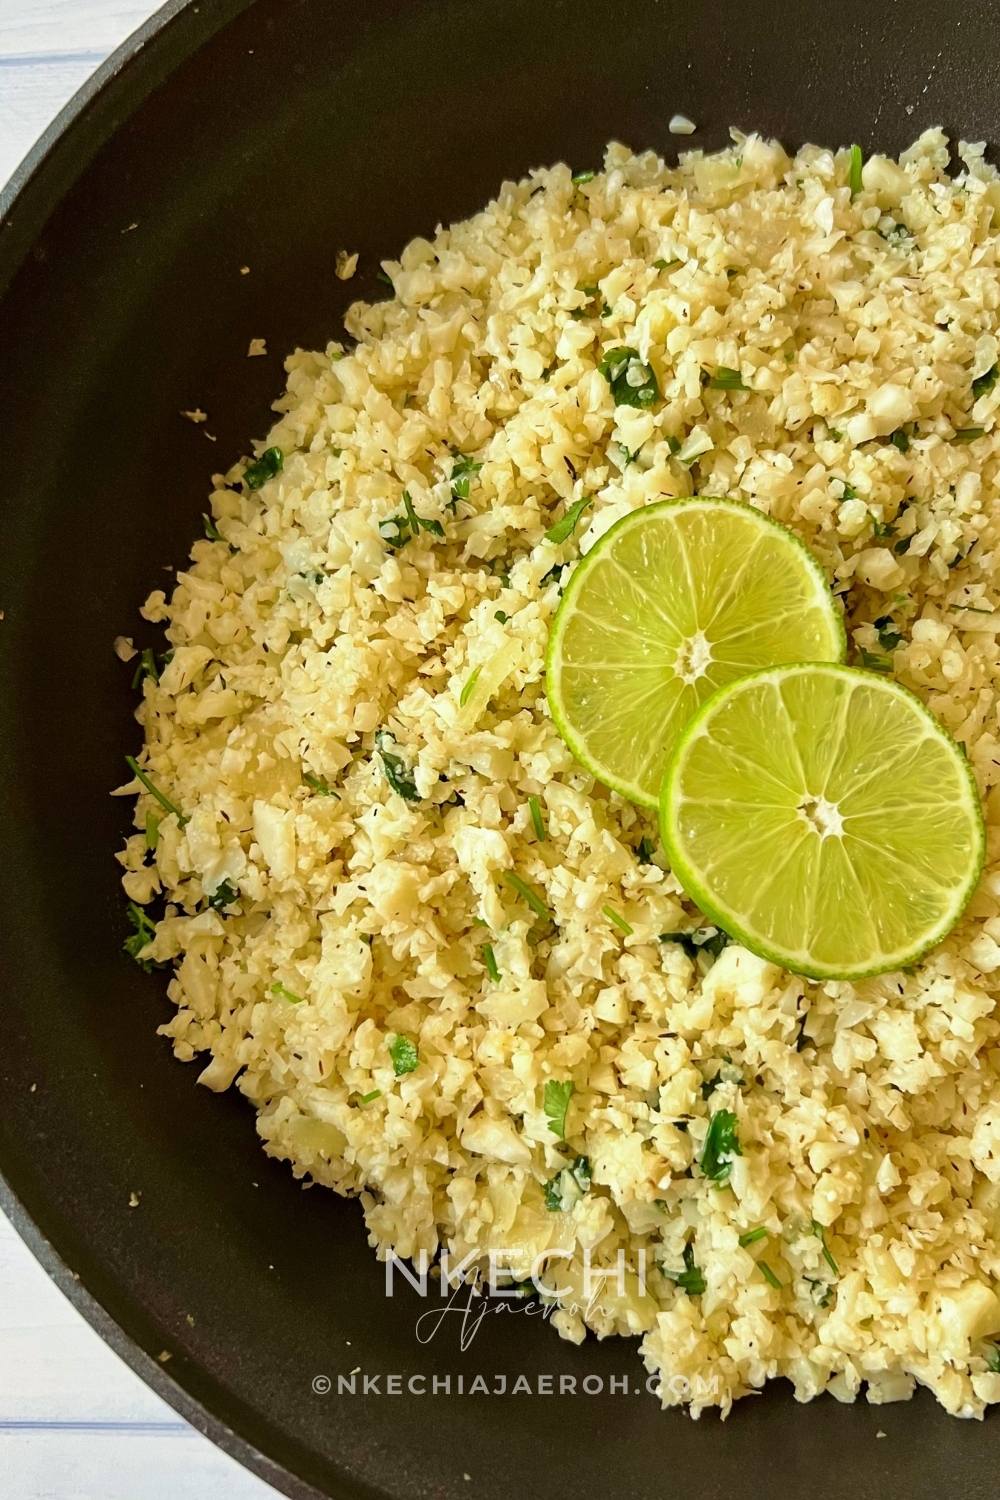 Cilantro Lime Rice With Cauliflower
For a healthy side dish with loads of flavor, turn to cauliflower rice. Seasoned with cilantro and lime, it's refreshing, filling, and utterly delicious. Cilantro lime cauliflower rice is perfect for when you're trying to stick to those resolutions or simply trying to work more veggies into your meals! If you are currently on a low-carb diet or thinking about it, this cauliflower rice will be suitable for you. Versatile and perfect for meal prepping. You can cook your cauliflower cilantro lime rice at the start of the week and then have it on hand during the week. Amazingly, this recipe caters to most of the diet preferences as it is gluten-free, vegan, paleo-friendly, keto, whole30,  and dairy-free!  